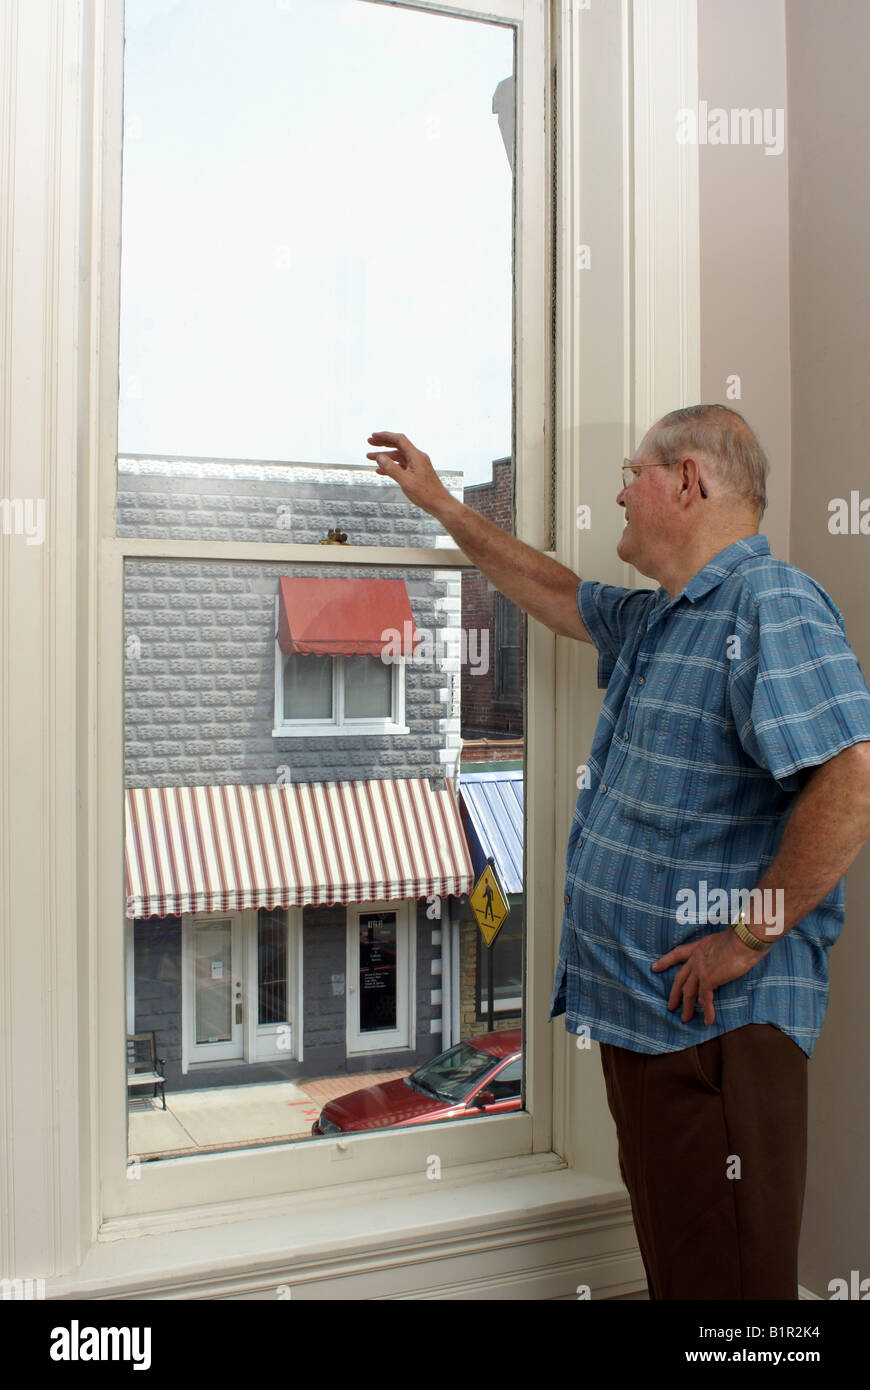 This elderly man waves at someone outside his window Stock Photo